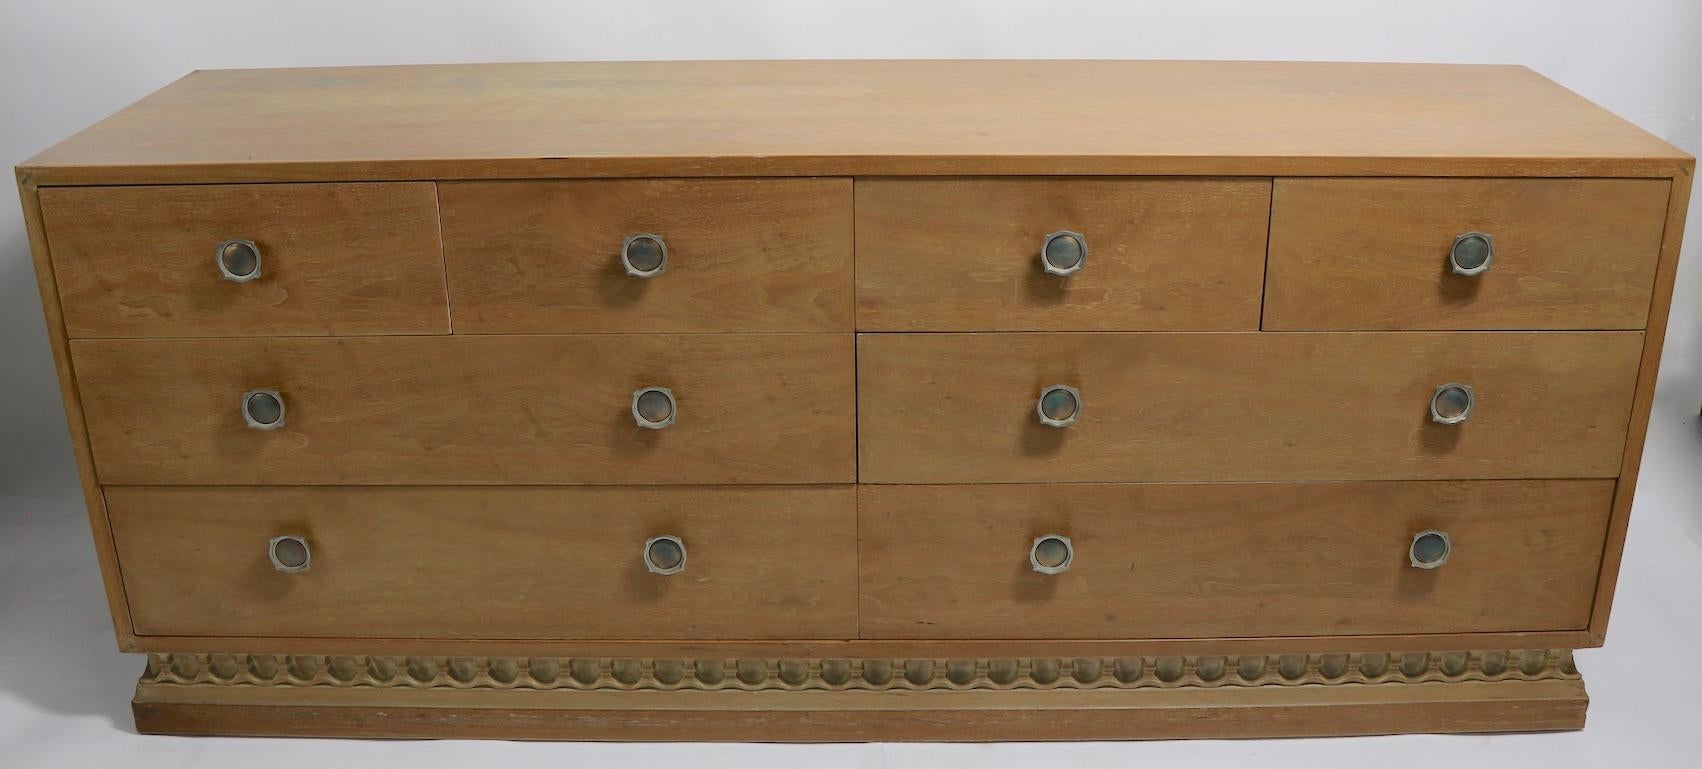 Stylish 8-drawer dresser Casa Del Sol designed by John Van Koert for Drexel. This dresser features for smaller drawers over four larger drawers creating ample storage, it is in good original condition showing some cosmetic wear notable on top